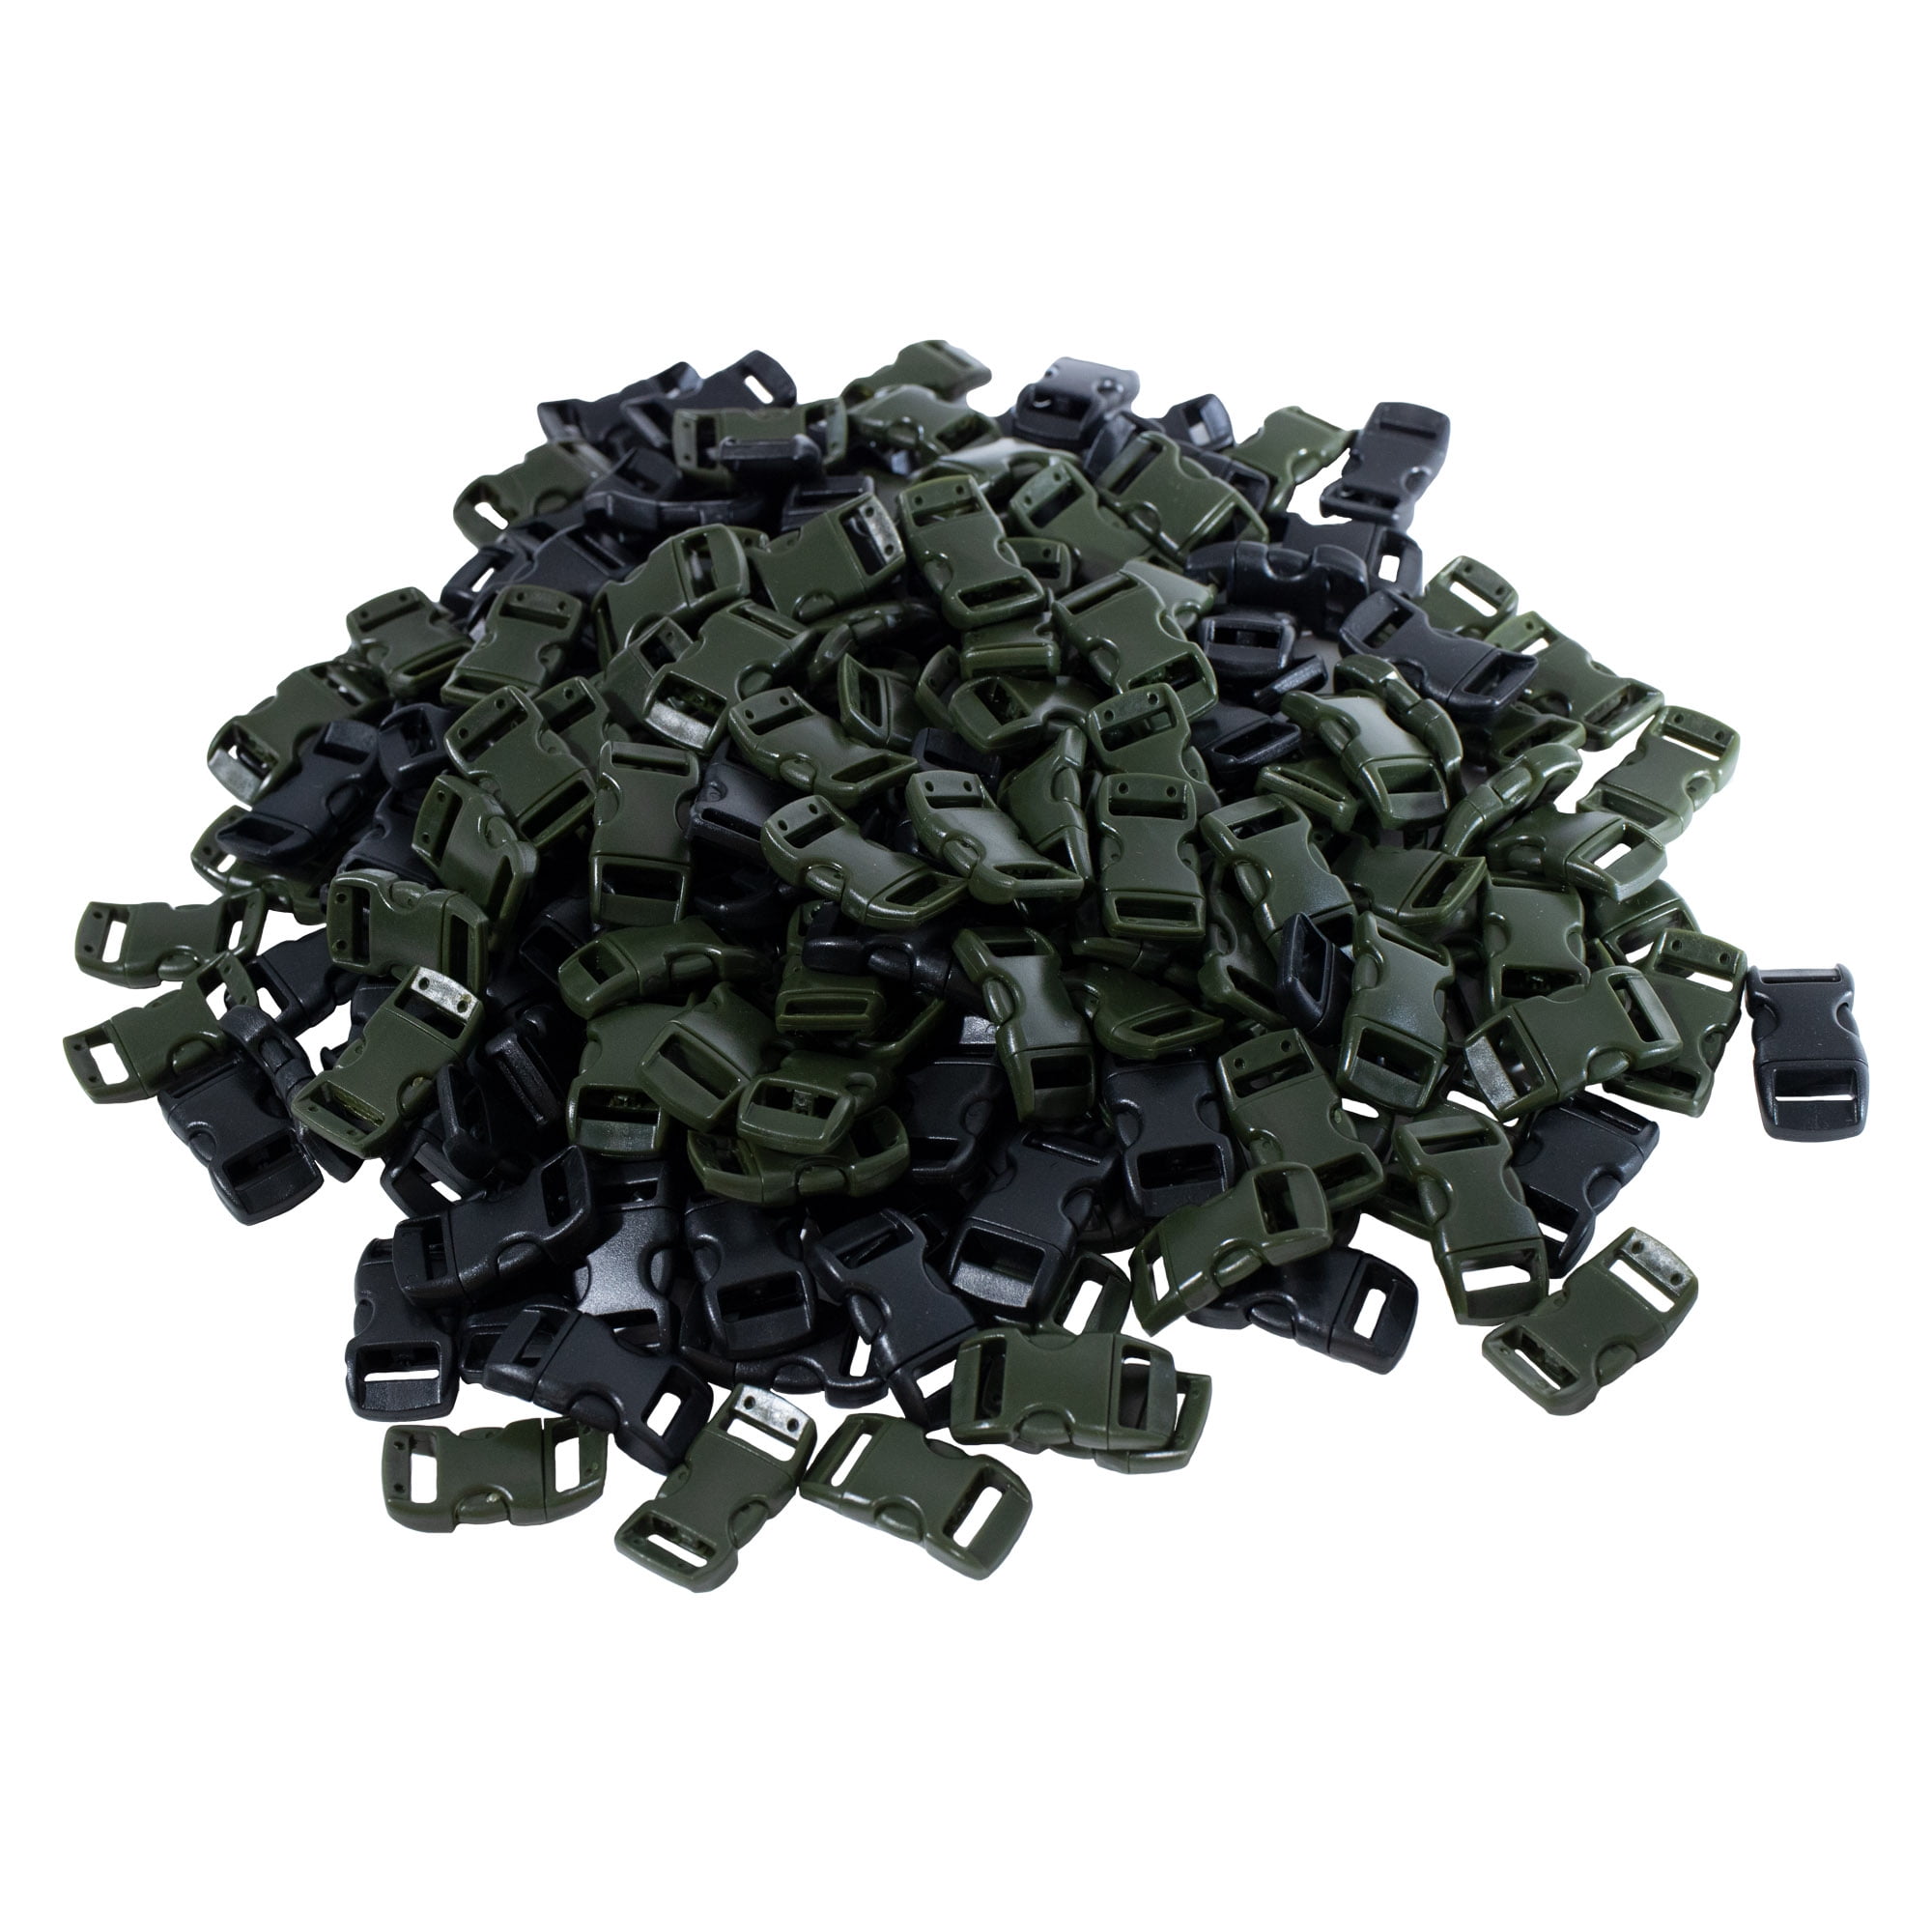 Black Plastic Contoured Side Release Buckles for Paracord Bracelets-60pcs 1/2 20 Each 5/8 and 3/8 inch